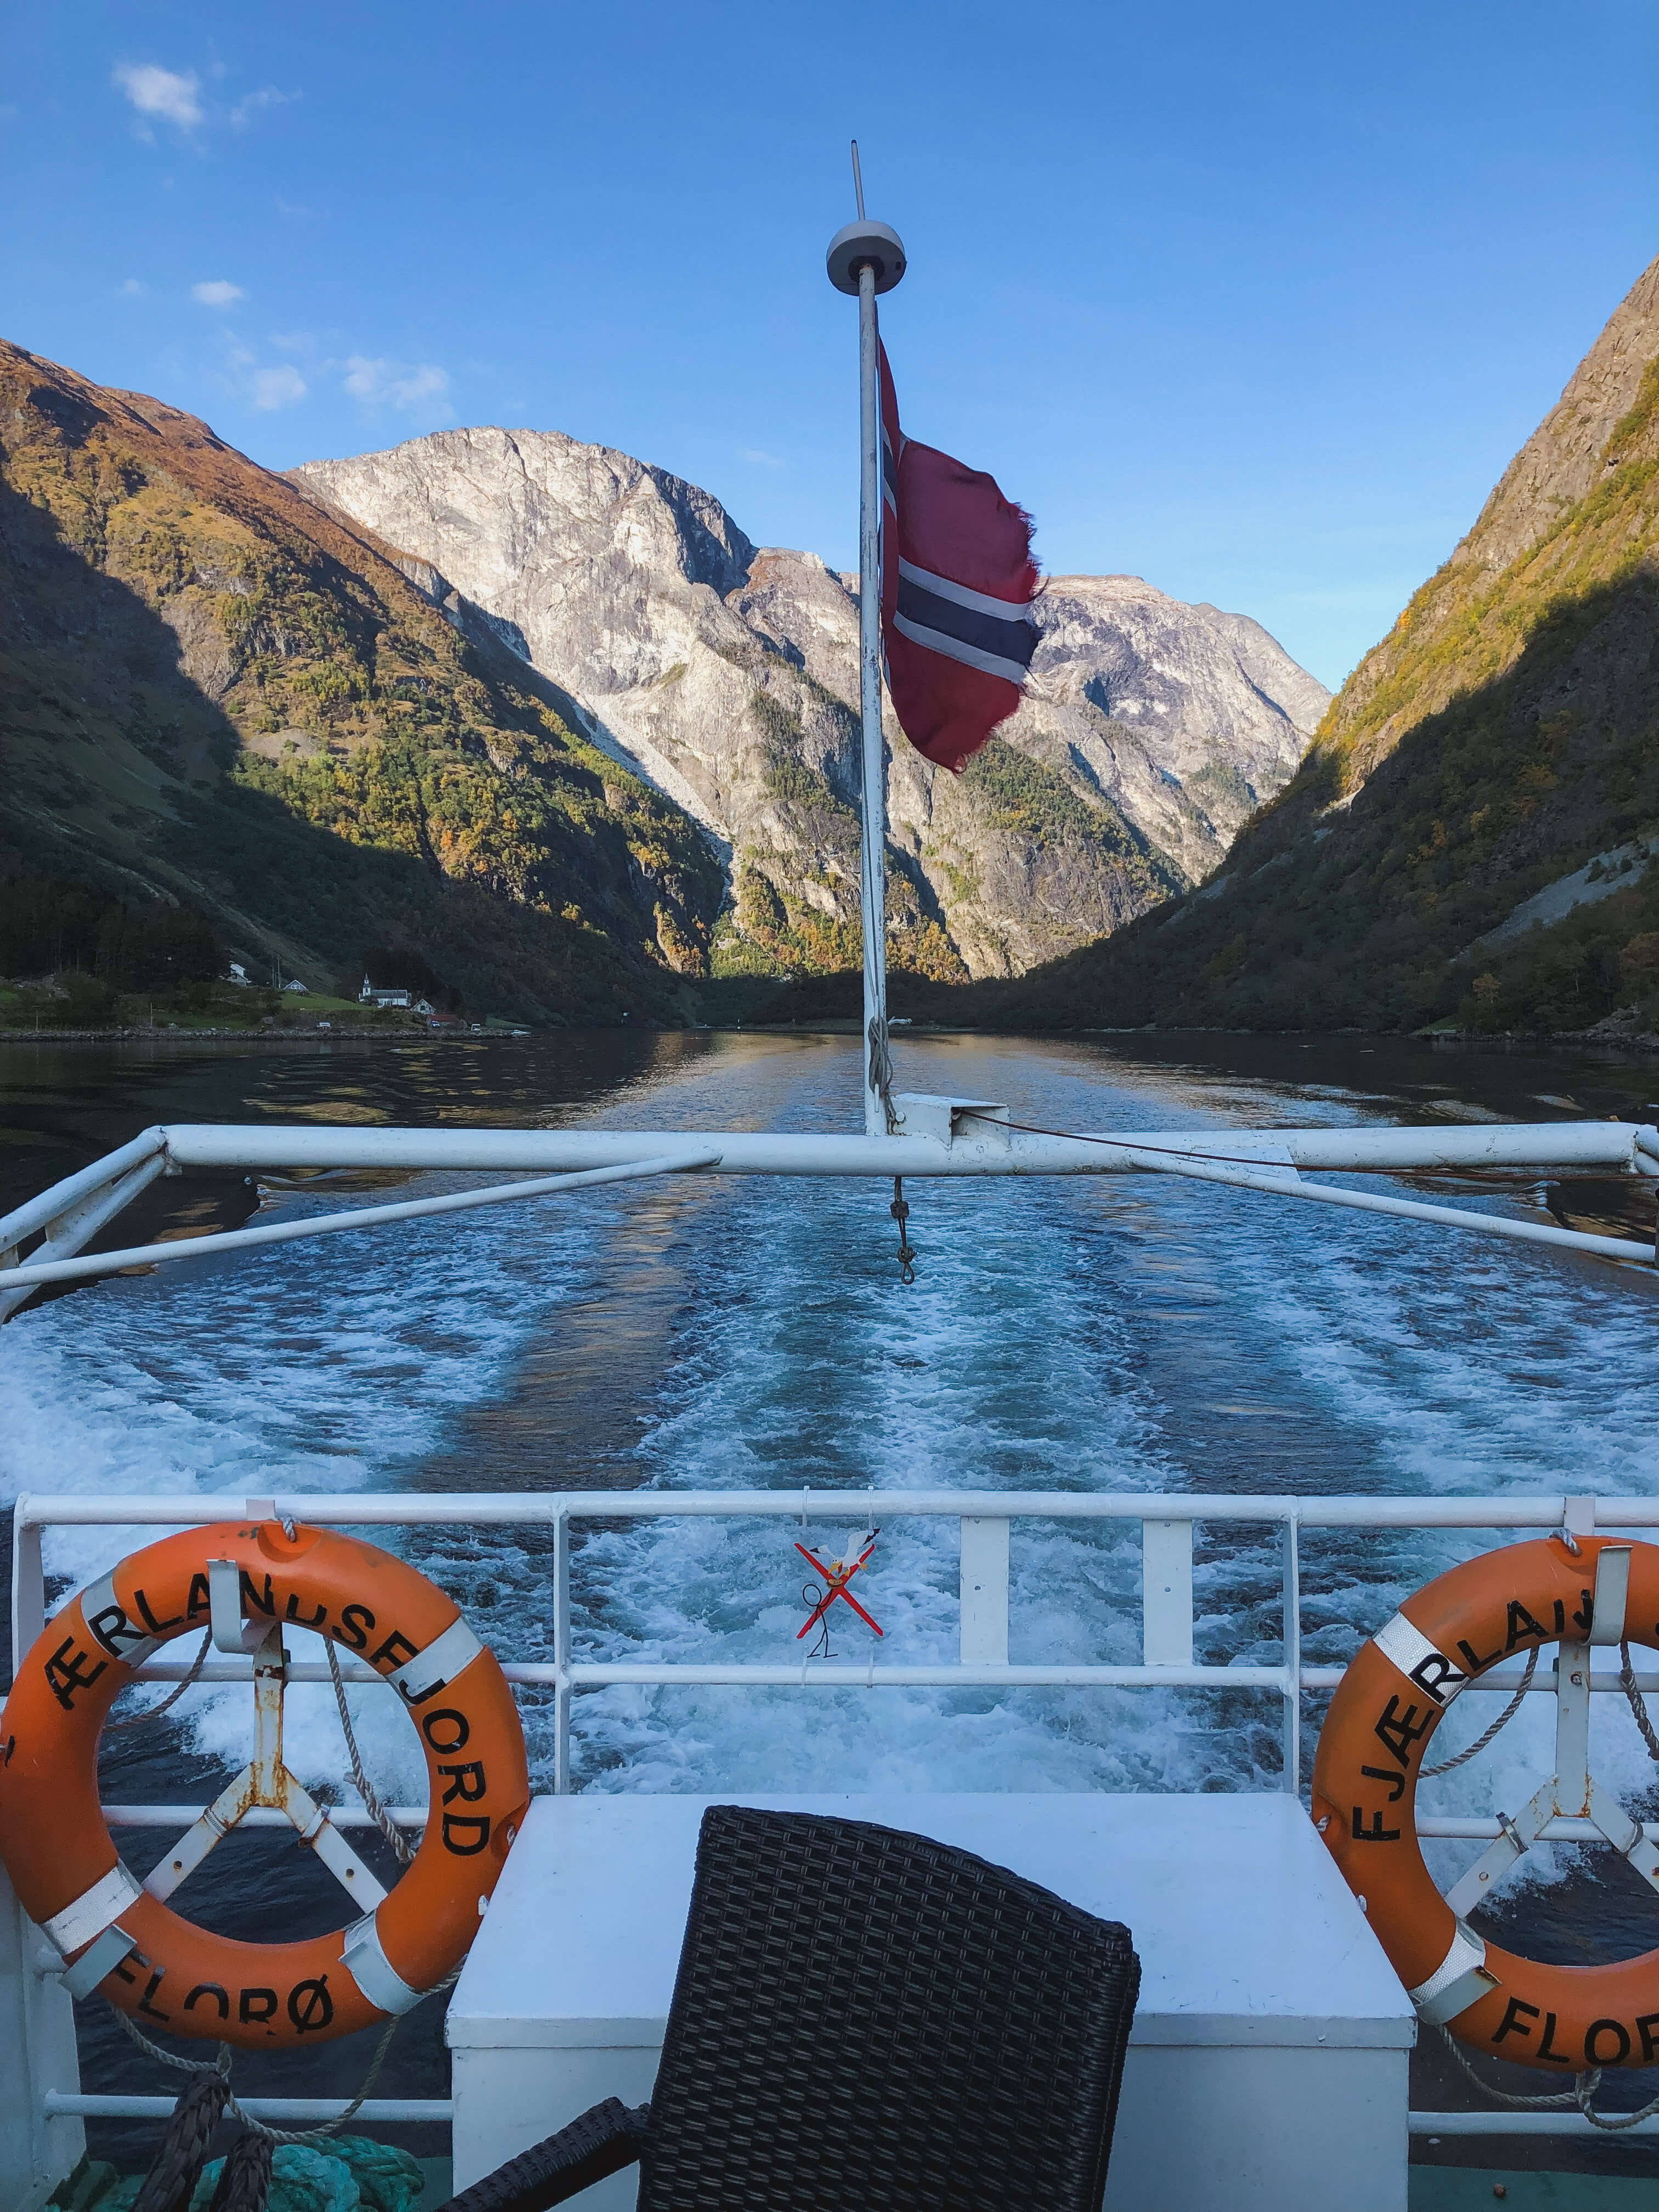 fjord cruise boat flam